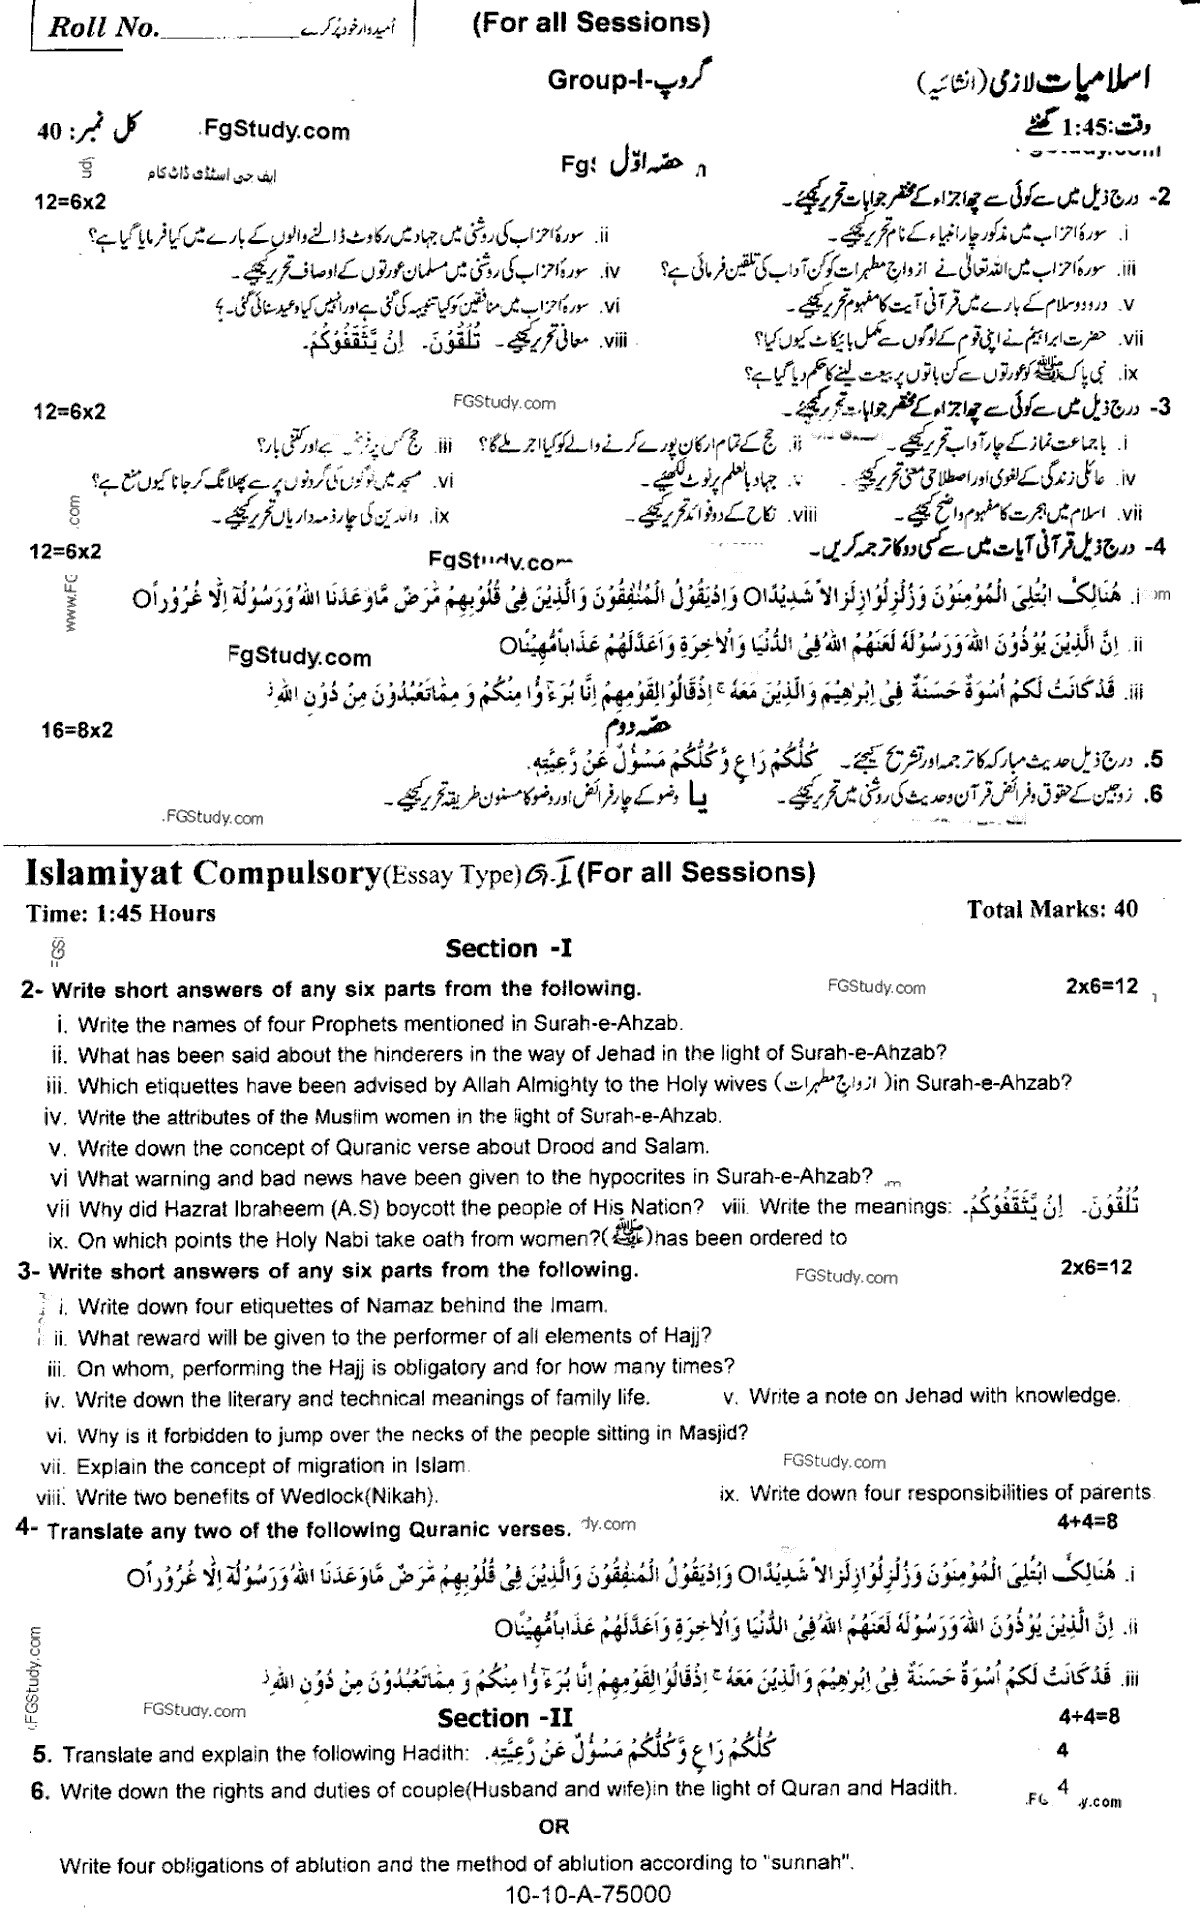 Islamiat Group 1 Subjective 10th Class Past Papers 2020